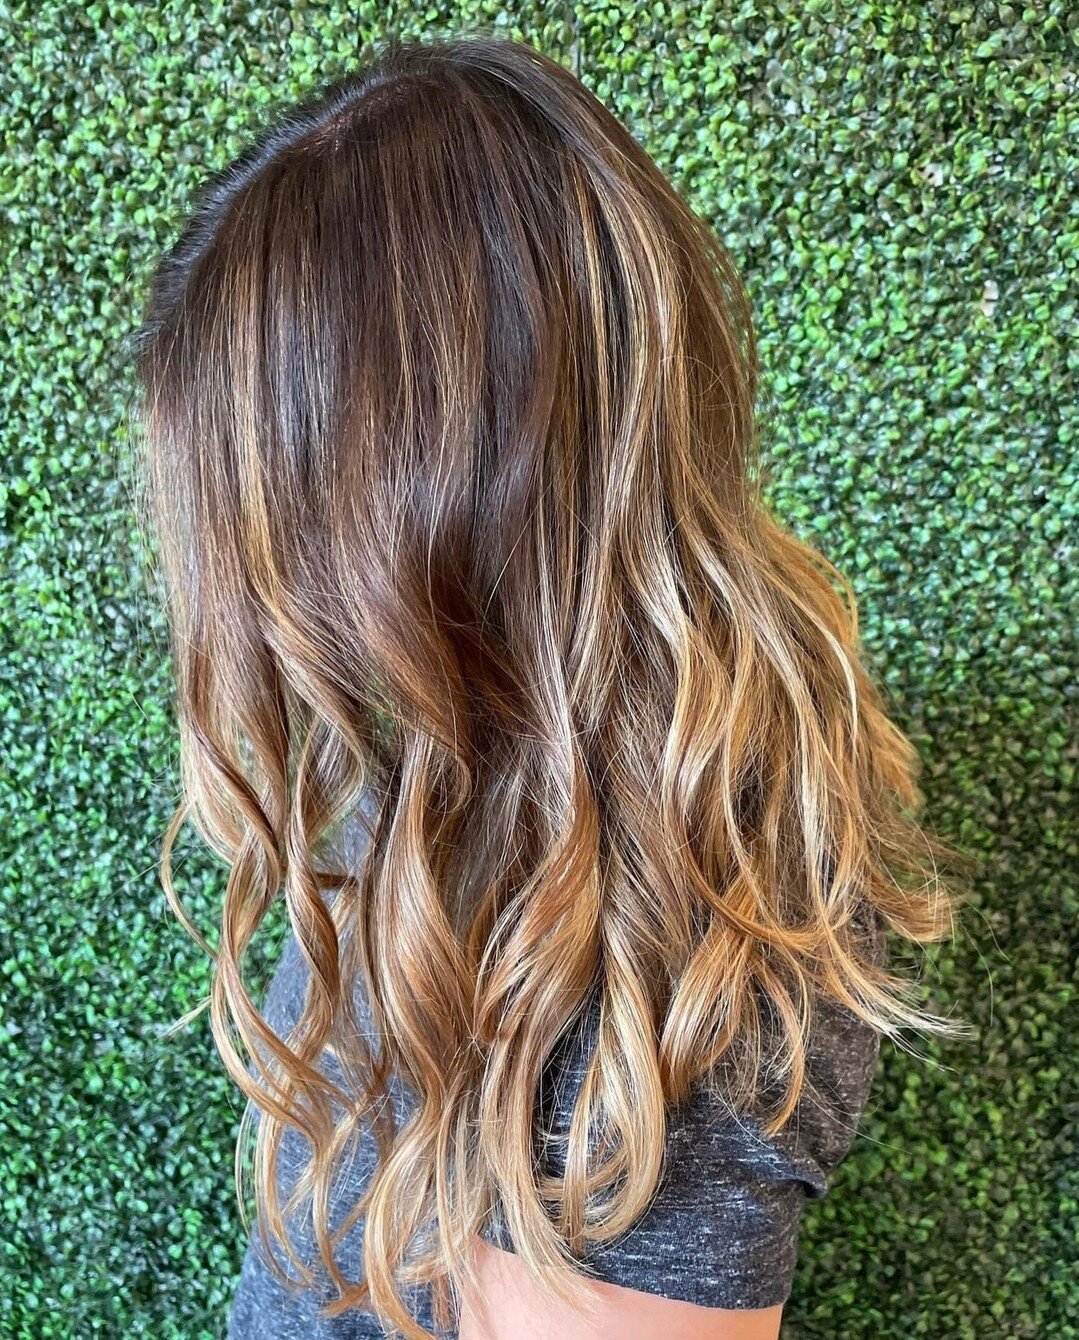 Beautiful Bronde vibes done by our talented @dollhairsbydanielle! ✨⁠
⁠
For appointments: 📞 (407)864-2587⁠
.⁠
.⁠
.⁠
#ucf #universityofcentralflorida #localorlando #oviedoonthepark #oviedoflorida #yelporlando #balayageorlando #localbusinessorlando #or